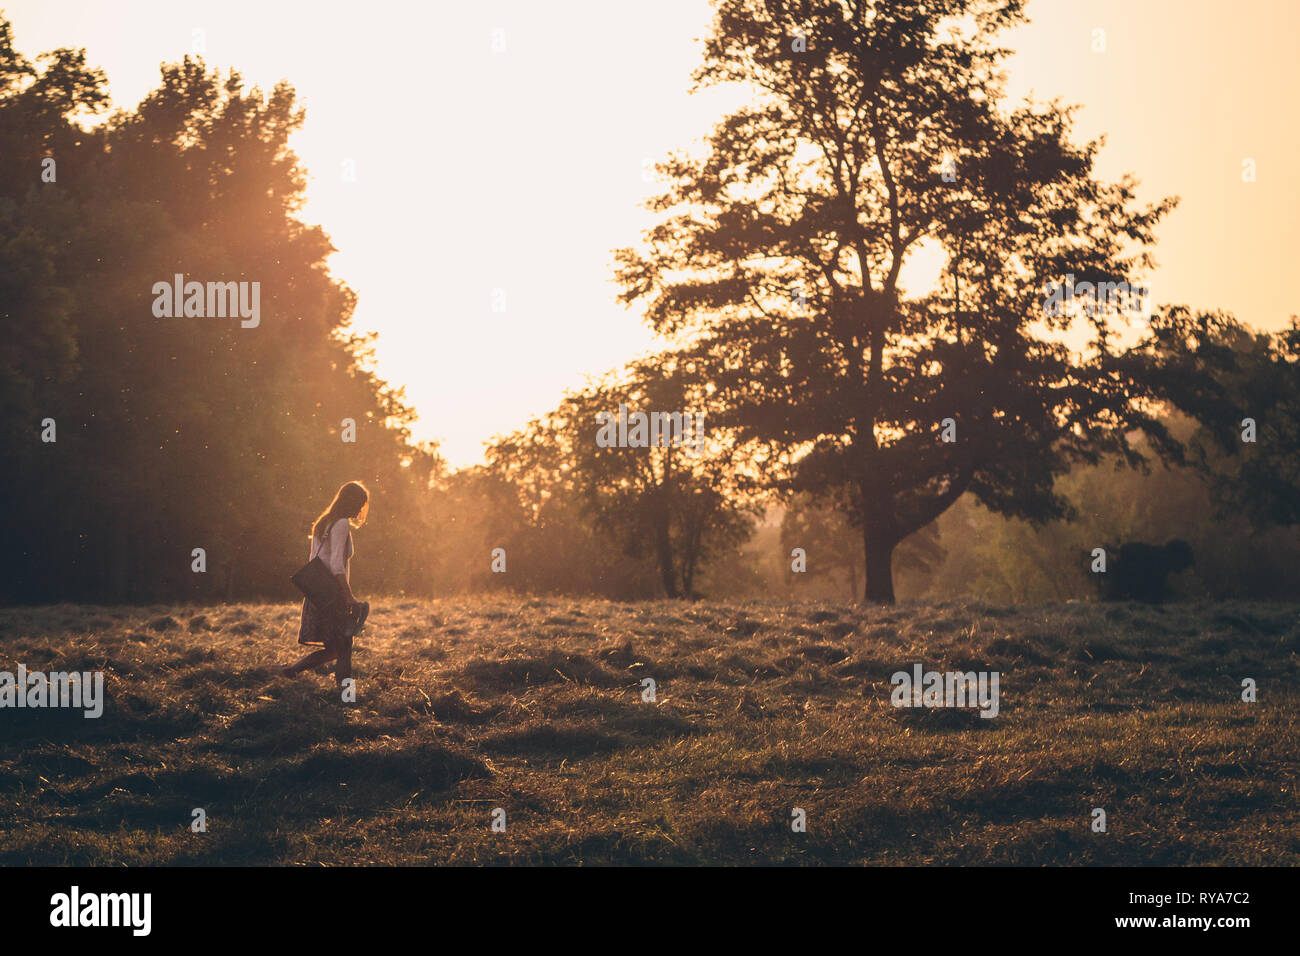 Single woman with long hair walking alone on a field of gras in front of a tree during sunset. Her face is not visible. Stock Photo